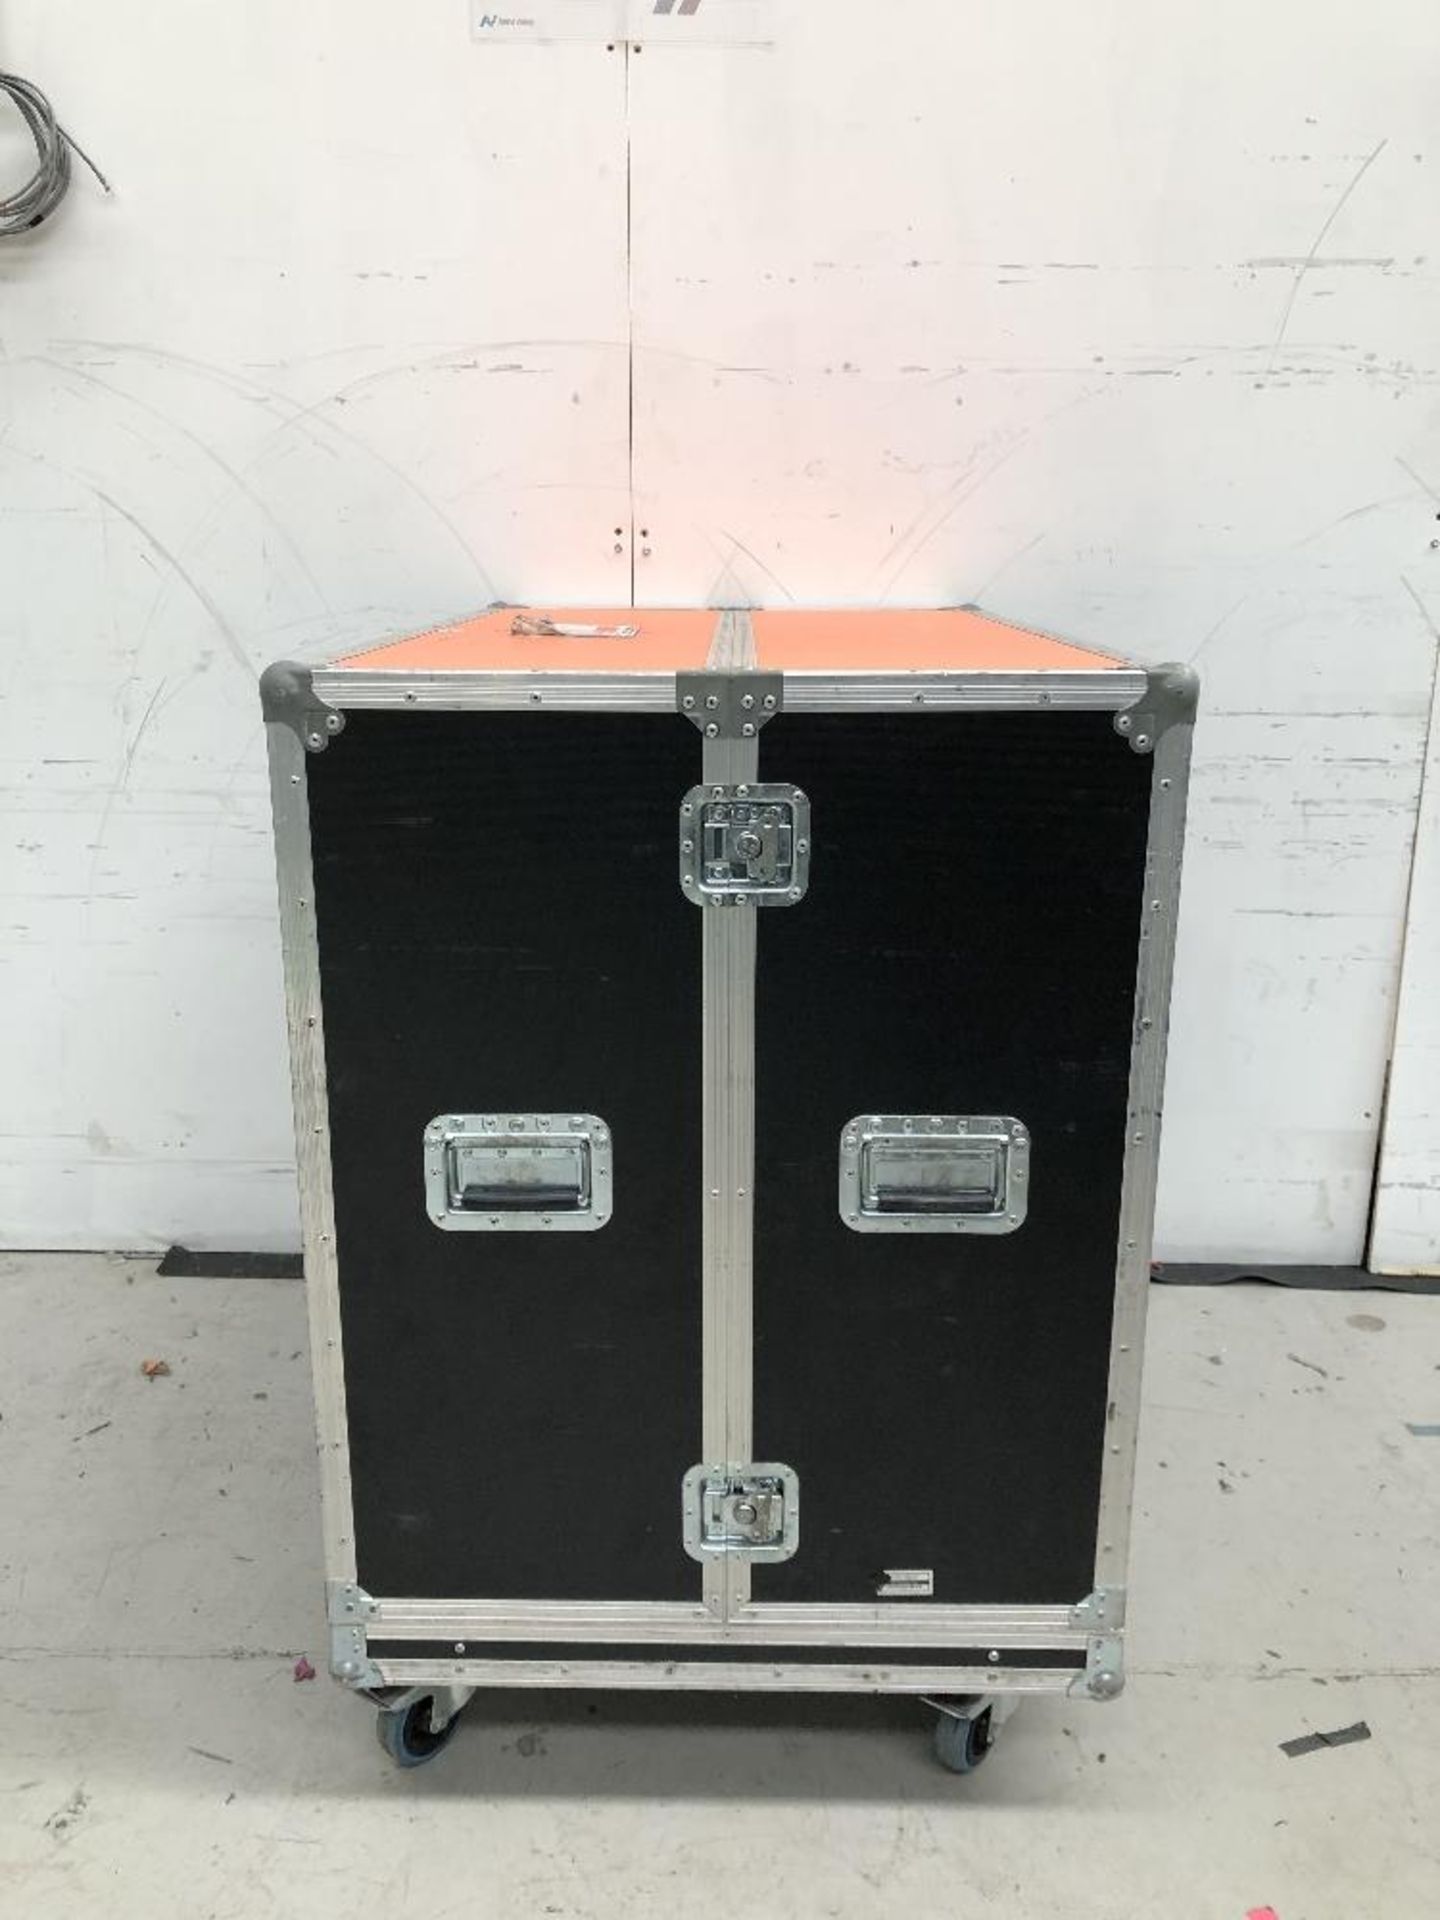 PPU Mobile Light Control Desk/Station With Flight case - Image 7 of 7